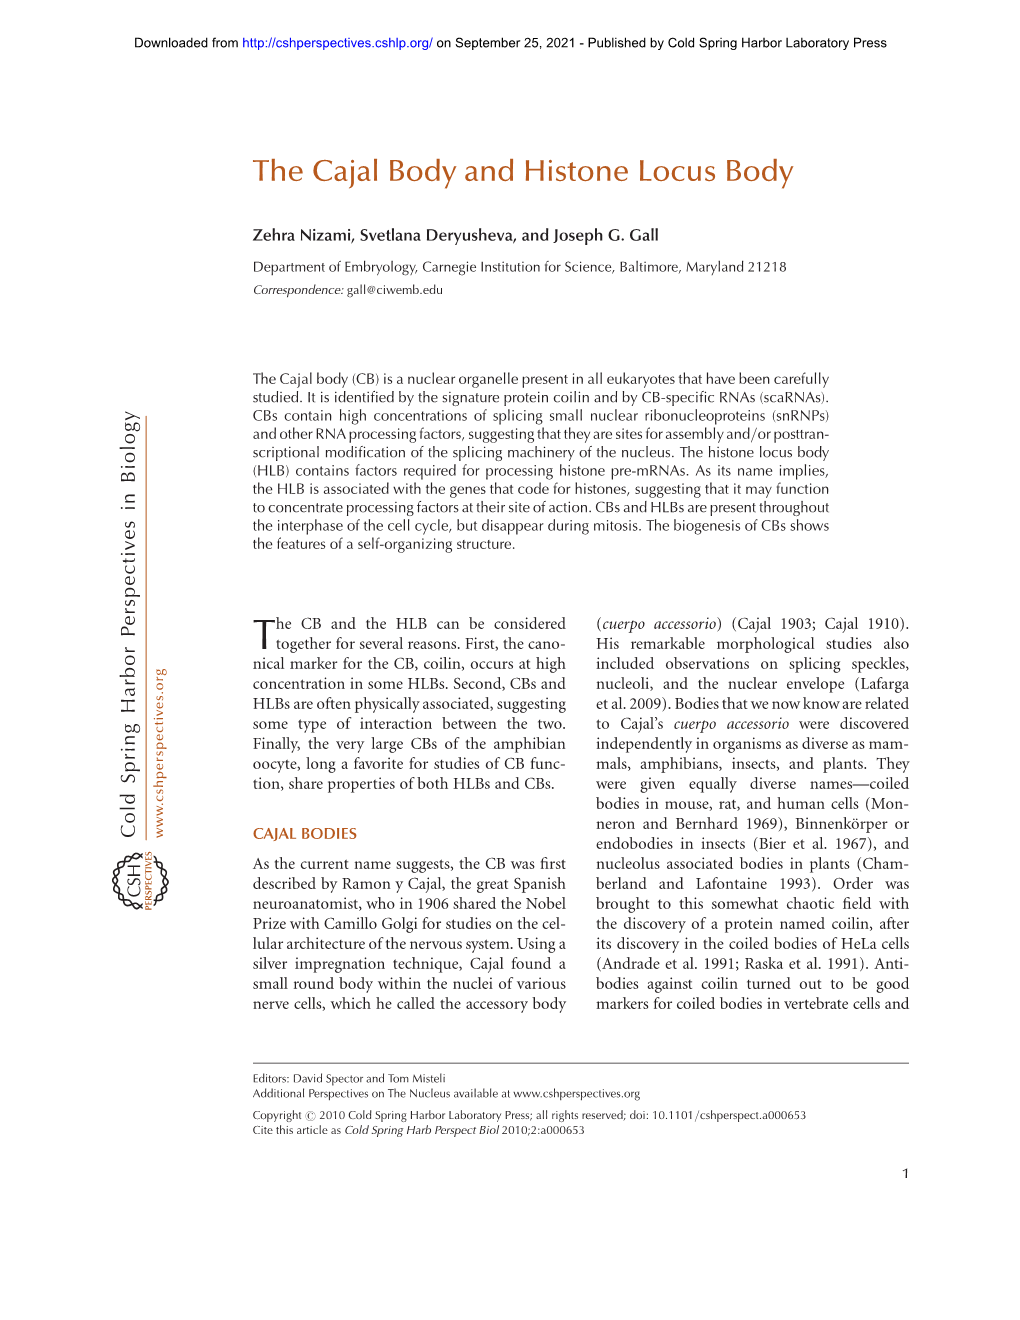 The Cajal Body and Histone Locus Body